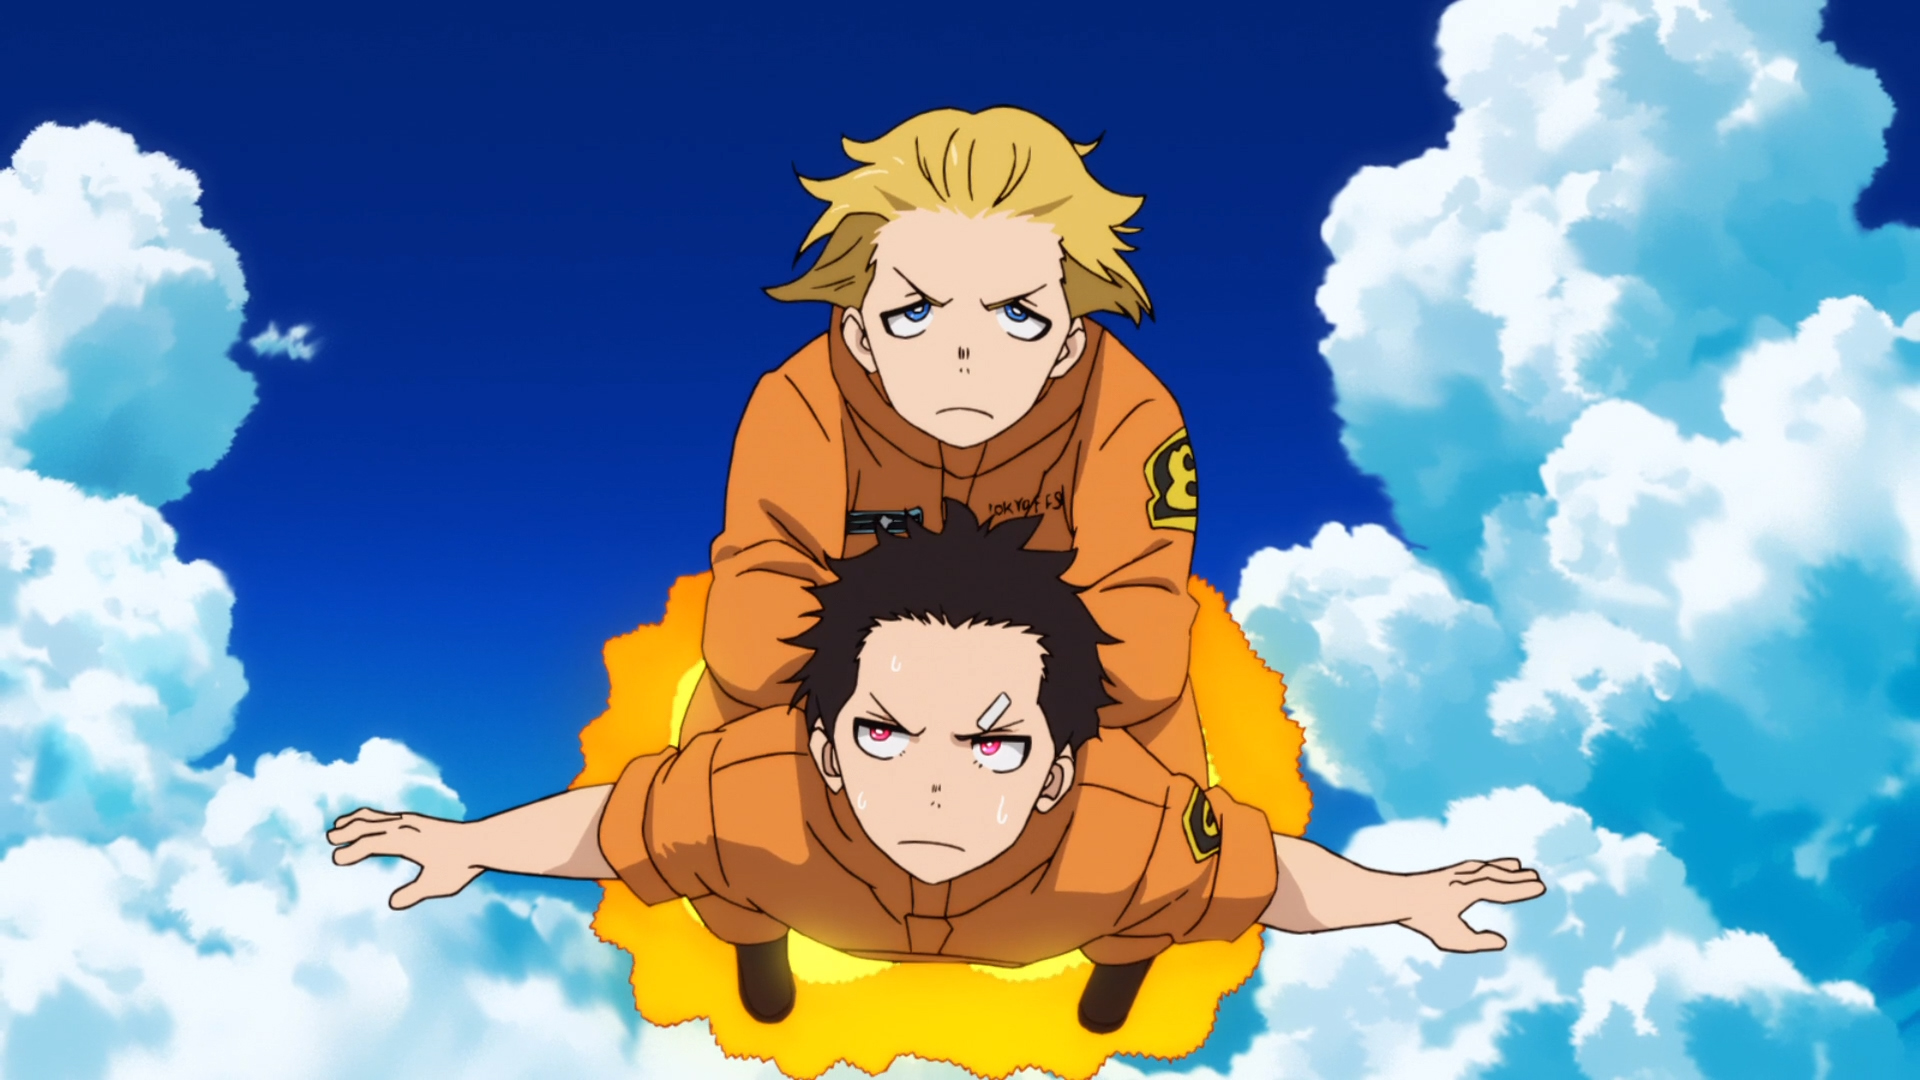 Fire Force Season 1 Part 1 Review • Anime UK News